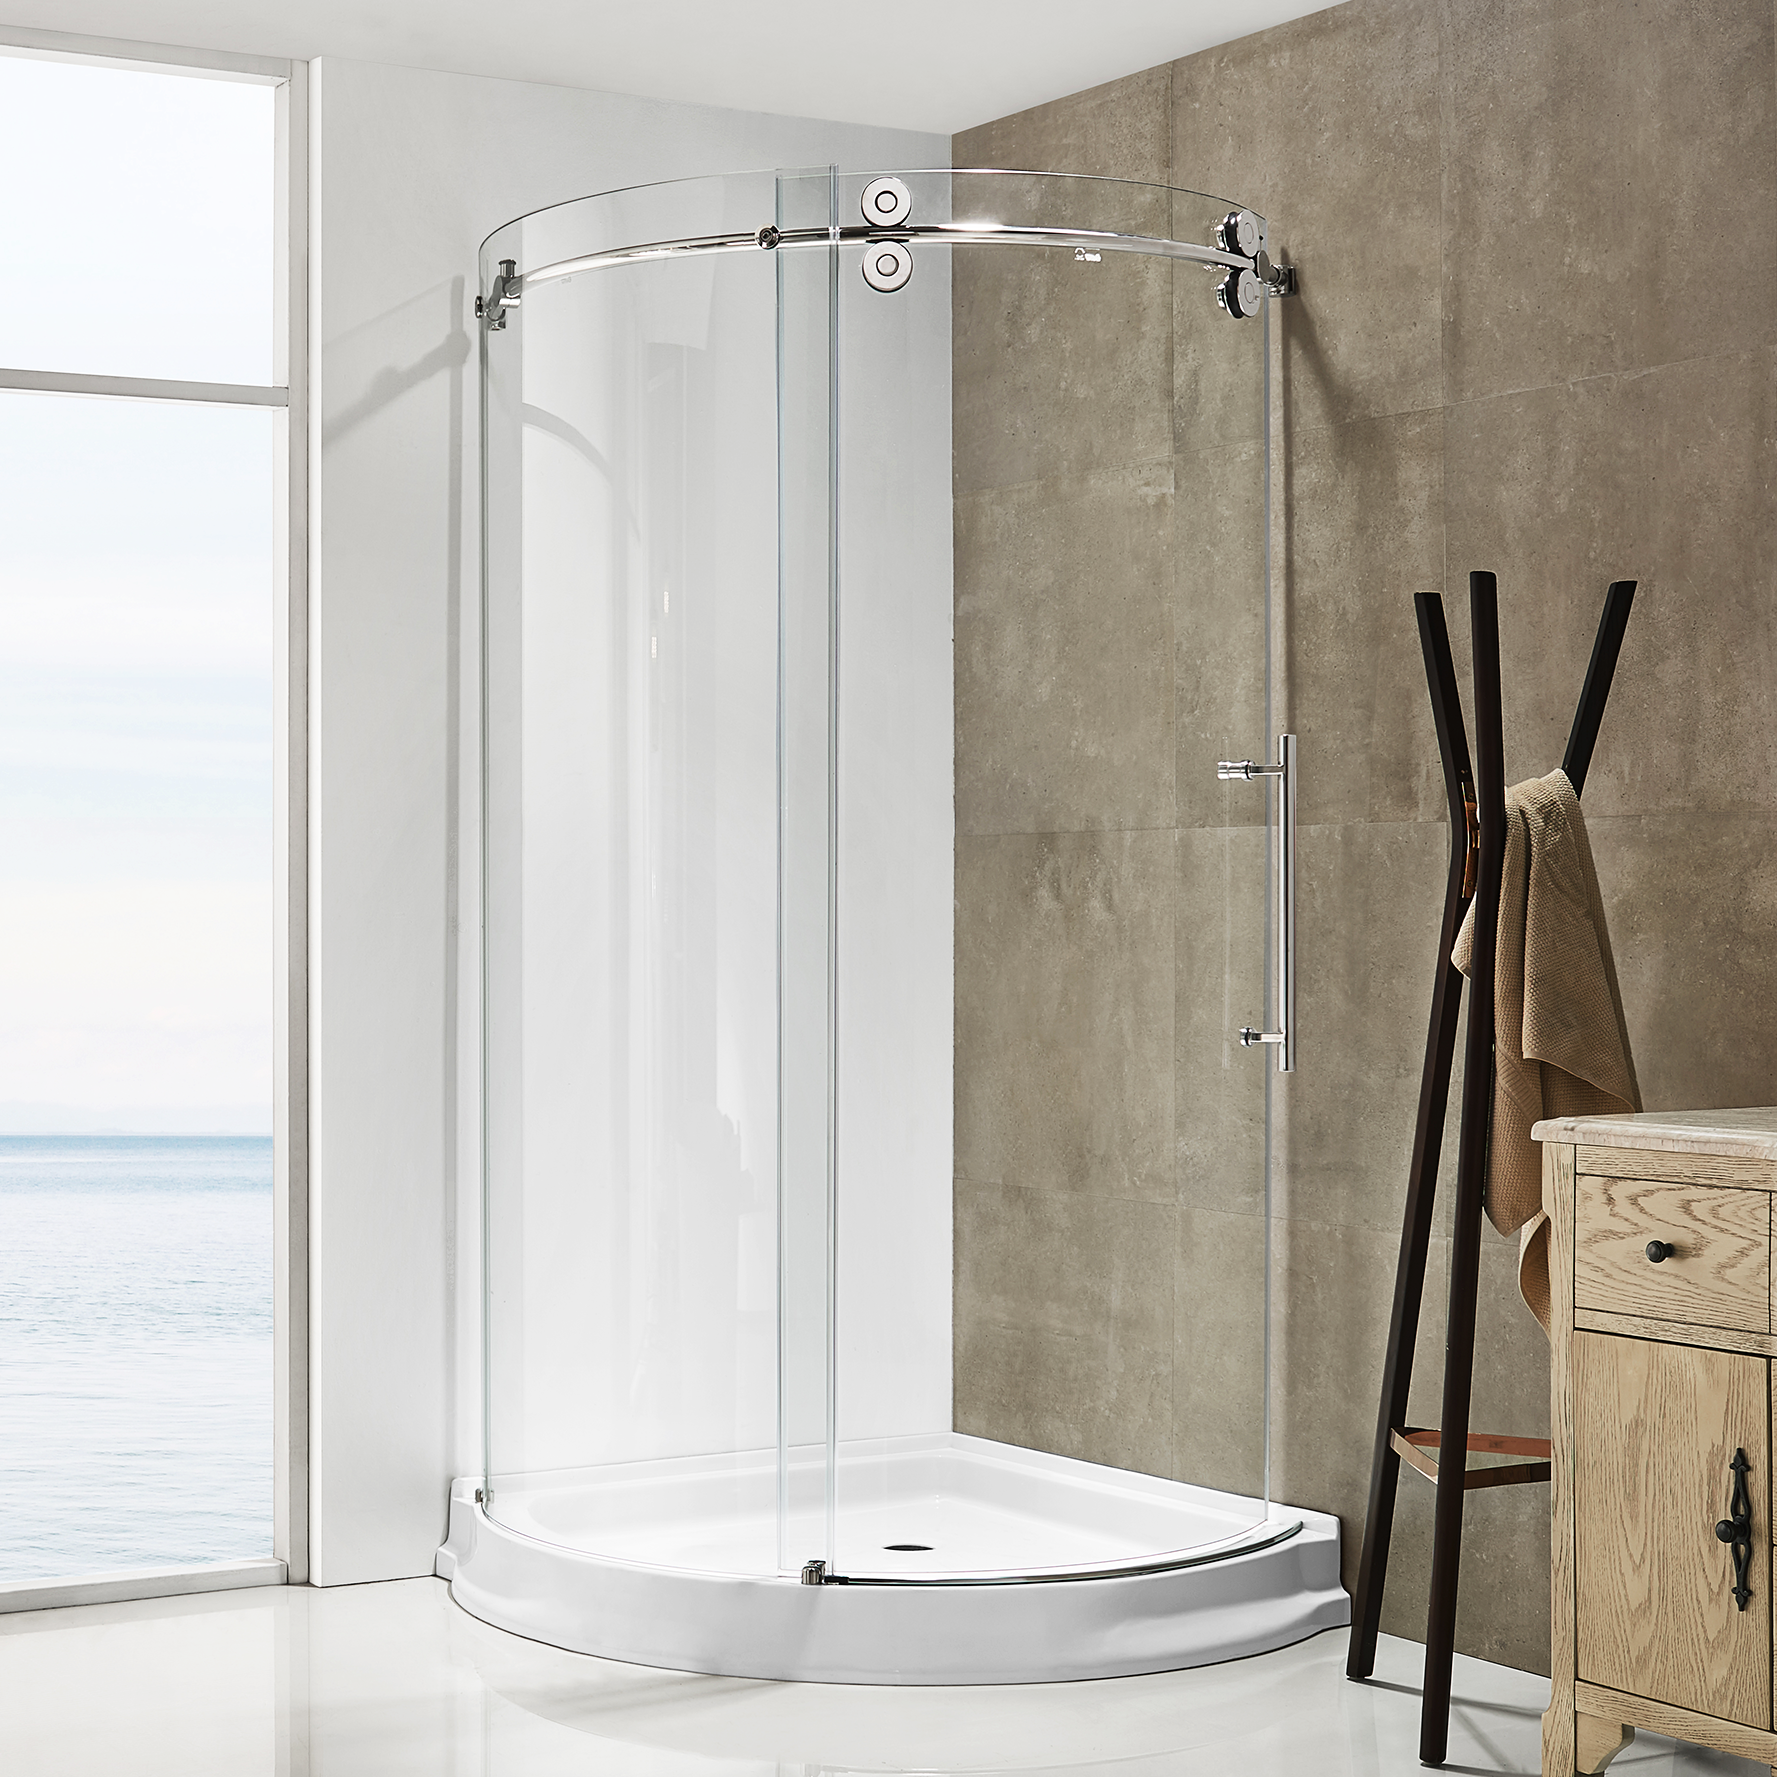 Dreamwerks 40"W x 79"H Frameless Sliding Shower Door Enclosure in Chrome Finish - Available in Clear or Frosted Glass